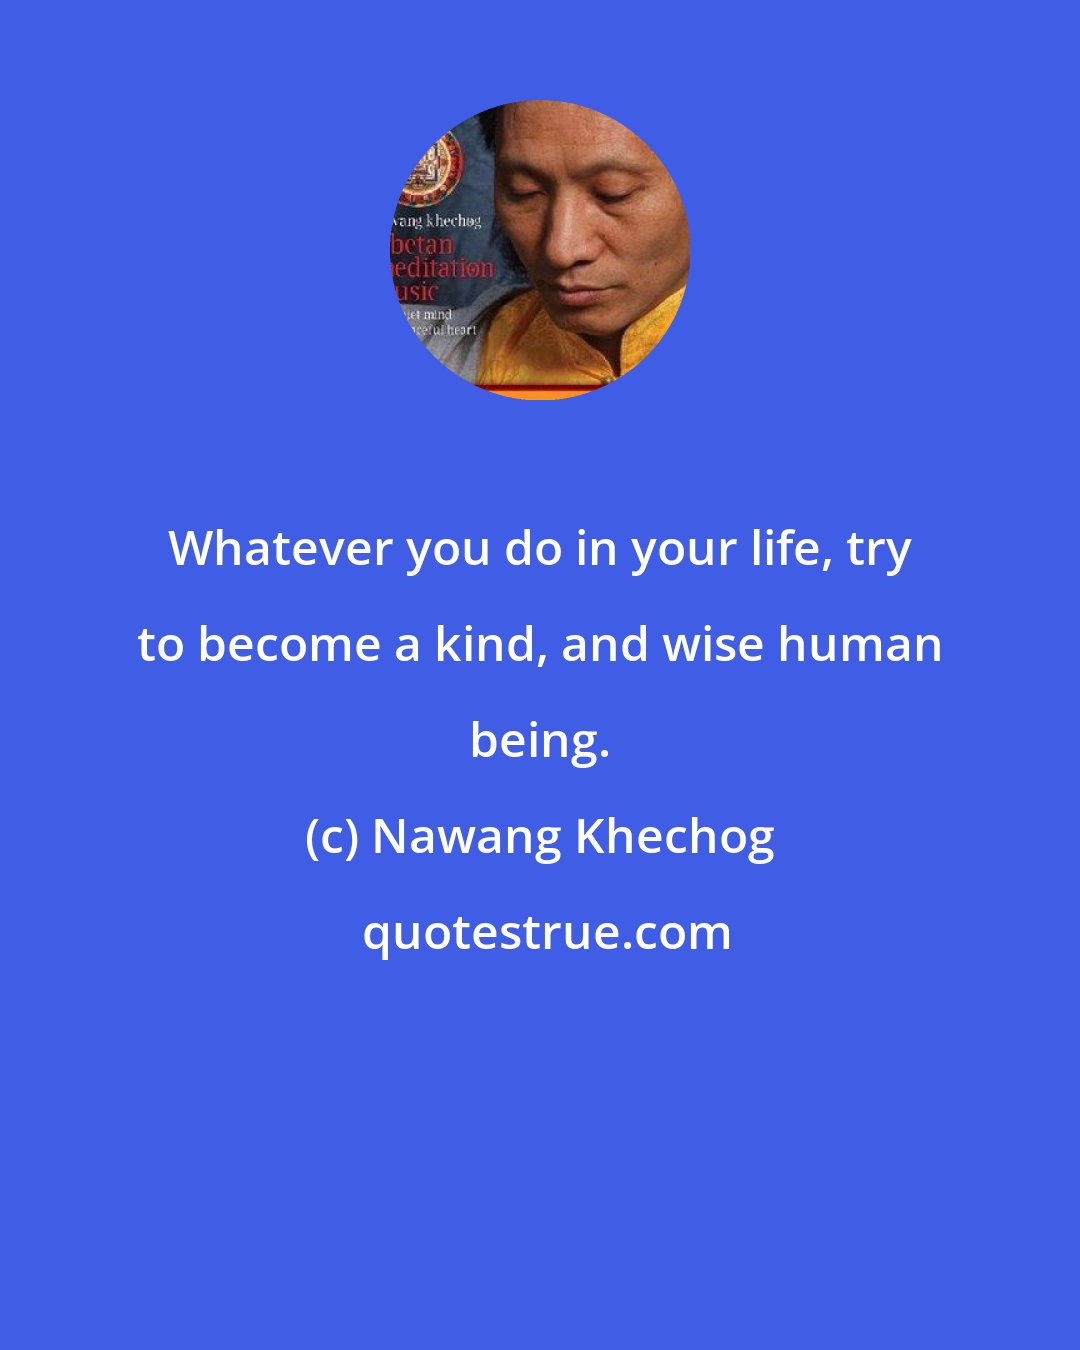 Nawang Khechog: Whatever you do in your life, try to become a kind, and wise human being.